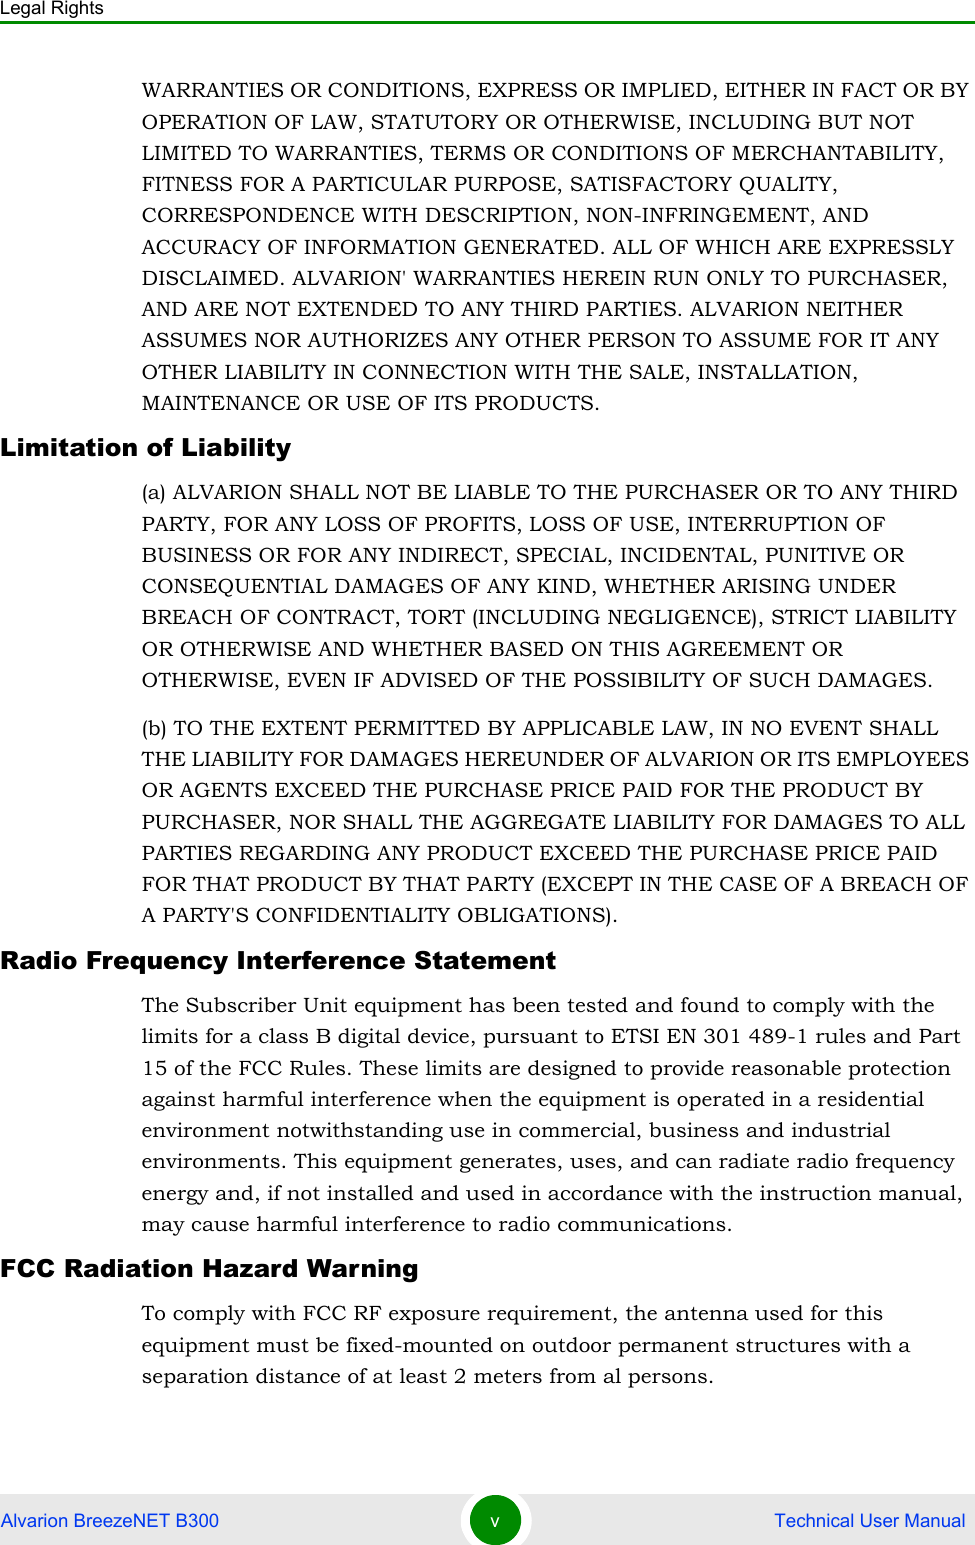 Legal RightsAlvarion BreezeNET B300 v Technical User ManualWARRANTIES OR CONDITIONS, EXPRESS OR IMPLIED, EITHER IN FACT OR BY OPERATION OF LAW, STATUTORY OR OTHERWISE, INCLUDING BUT NOT LIMITED TO WARRANTIES, TERMS OR CONDITIONS OF MERCHANTABILITY, FITNESS FOR A PARTICULAR PURPOSE, SATISFACTORY QUALITY, CORRESPONDENCE WITH DESCRIPTION, NON-INFRINGEMENT, AND ACCURACY OF INFORMATION GENERATED. ALL OF WHICH ARE EXPRESSLY DISCLAIMED. ALVARION&apos; WARRANTIES HEREIN RUN ONLY TO PURCHASER, AND ARE NOT EXTENDED TO ANY THIRD PARTIES. ALVARION NEITHER ASSUMES NOR AUTHORIZES ANY OTHER PERSON TO ASSUME FOR IT ANY OTHER LIABILITY IN CONNECTION WITH THE SALE, INSTALLATION, MAINTENANCE OR USE OF ITS PRODUCTS.Limitation of Liability(a) ALVARION SHALL NOT BE LIABLE TO THE PURCHASER OR TO ANY THIRD PARTY, FOR ANY LOSS OF PROFITS, LOSS OF USE, INTERRUPTION OF BUSINESS OR FOR ANY INDIRECT, SPECIAL, INCIDENTAL, PUNITIVE OR CONSEQUENTIAL DAMAGES OF ANY KIND, WHETHER ARISING UNDER BREACH OF CONTRACT, TORT (INCLUDING NEGLIGENCE), STRICT LIABILITY OR OTHERWISE AND WHETHER BASED ON THIS AGREEMENT OR OTHERWISE, EVEN IF ADVISED OF THE POSSIBILITY OF SUCH DAMAGES.(b) TO THE EXTENT PERMITTED BY APPLICABLE LAW, IN NO EVENT SHALL THE LIABILITY FOR DAMAGES HEREUNDER OF ALVARION OR ITS EMPLOYEES OR AGENTS EXCEED THE PURCHASE PRICE PAID FOR THE PRODUCT BY PURCHASER, NOR SHALL THE AGGREGATE LIABILITY FOR DAMAGES TO ALL PARTIES REGARDING ANY PRODUCT EXCEED THE PURCHASE PRICE PAID FOR THAT PRODUCT BY THAT PARTY (EXCEPT IN THE CASE OF A BREACH OF A PARTY&apos;S CONFIDENTIALITY OBLIGATIONS).Radio Frequency Interference StatementThe Subscriber Unit equipment has been tested and found to comply with the limits for a class B digital device, pursuant to ETSI EN 301 489-1 rules and Part 15 of the FCC Rules. These limits are designed to provide reasonable protection against harmful interference when the equipment is operated in a residential environment notwithstanding use in commercial, business and industrial environments. This equipment generates, uses, and can radiate radio frequency energy and, if not installed and used in accordance with the instruction manual, may cause harmful interference to radio communications.FCC Radiation Hazard WarningTo comply with FCC RF exposure requirement, the antenna used for this equipment must be fixed-mounted on outdoor permanent structures with a separation distance of at least 2 meters from al persons.